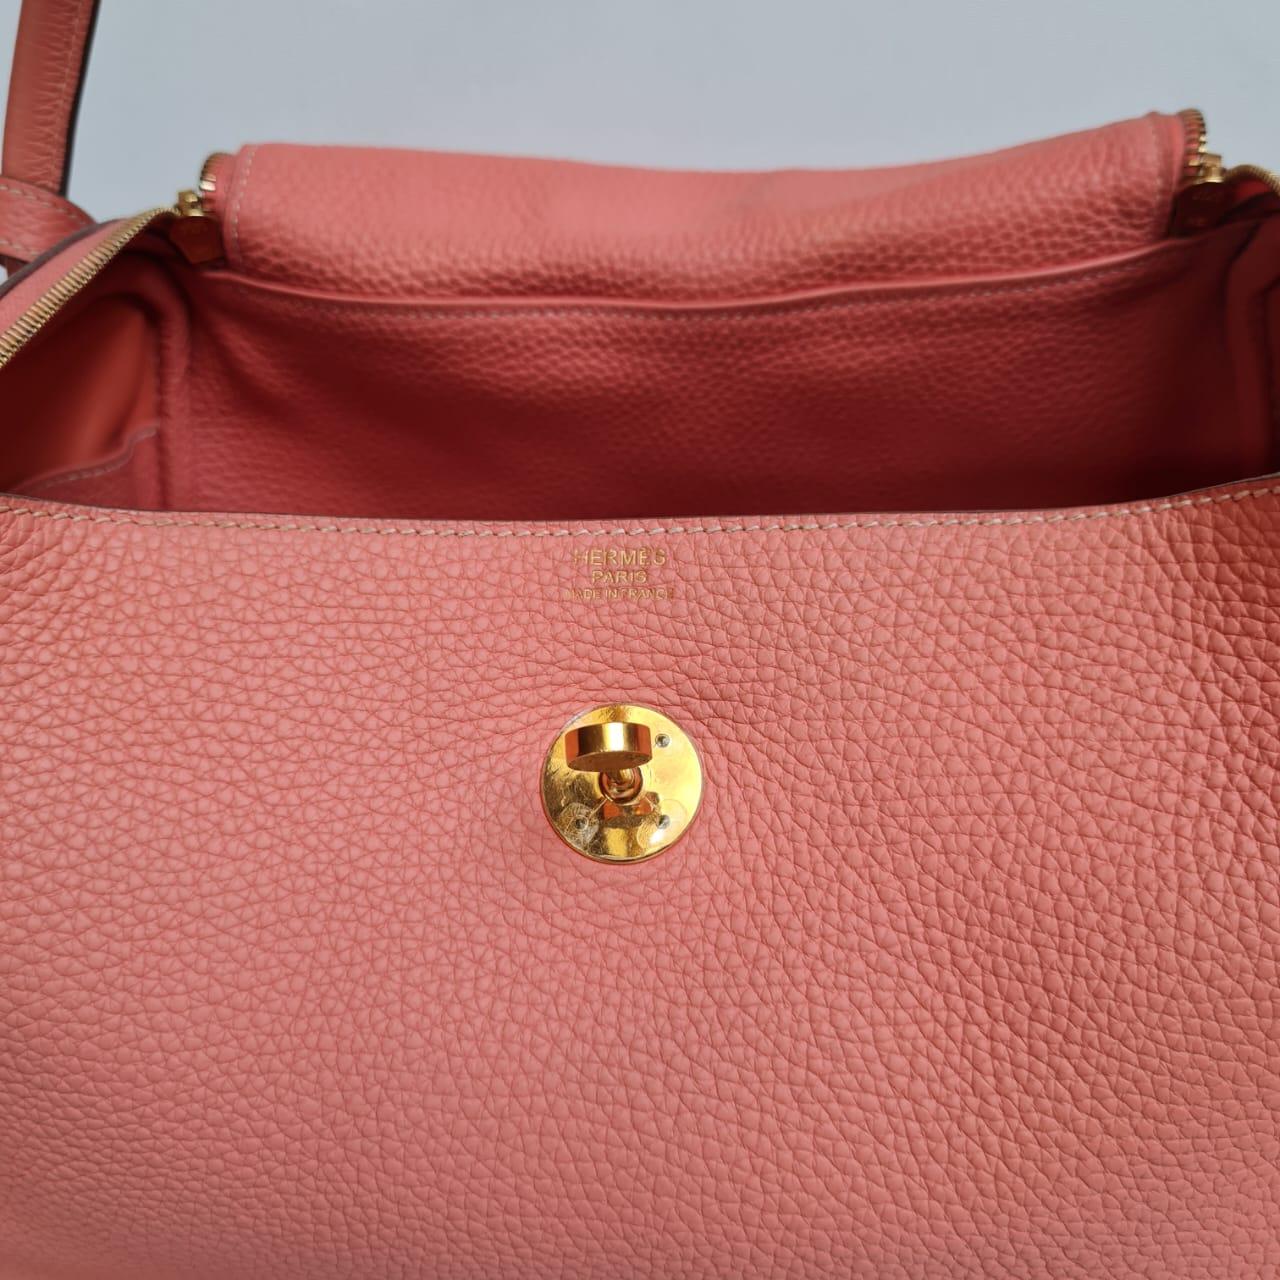 Beautiful lindy 30 in crevette clemence leather with gold hardware. Pink-peach flamingo color, really beautiful color to add to your collection. Overall still in excellent condition. Comes with its dust bag and rain coat. Print of copy receipt